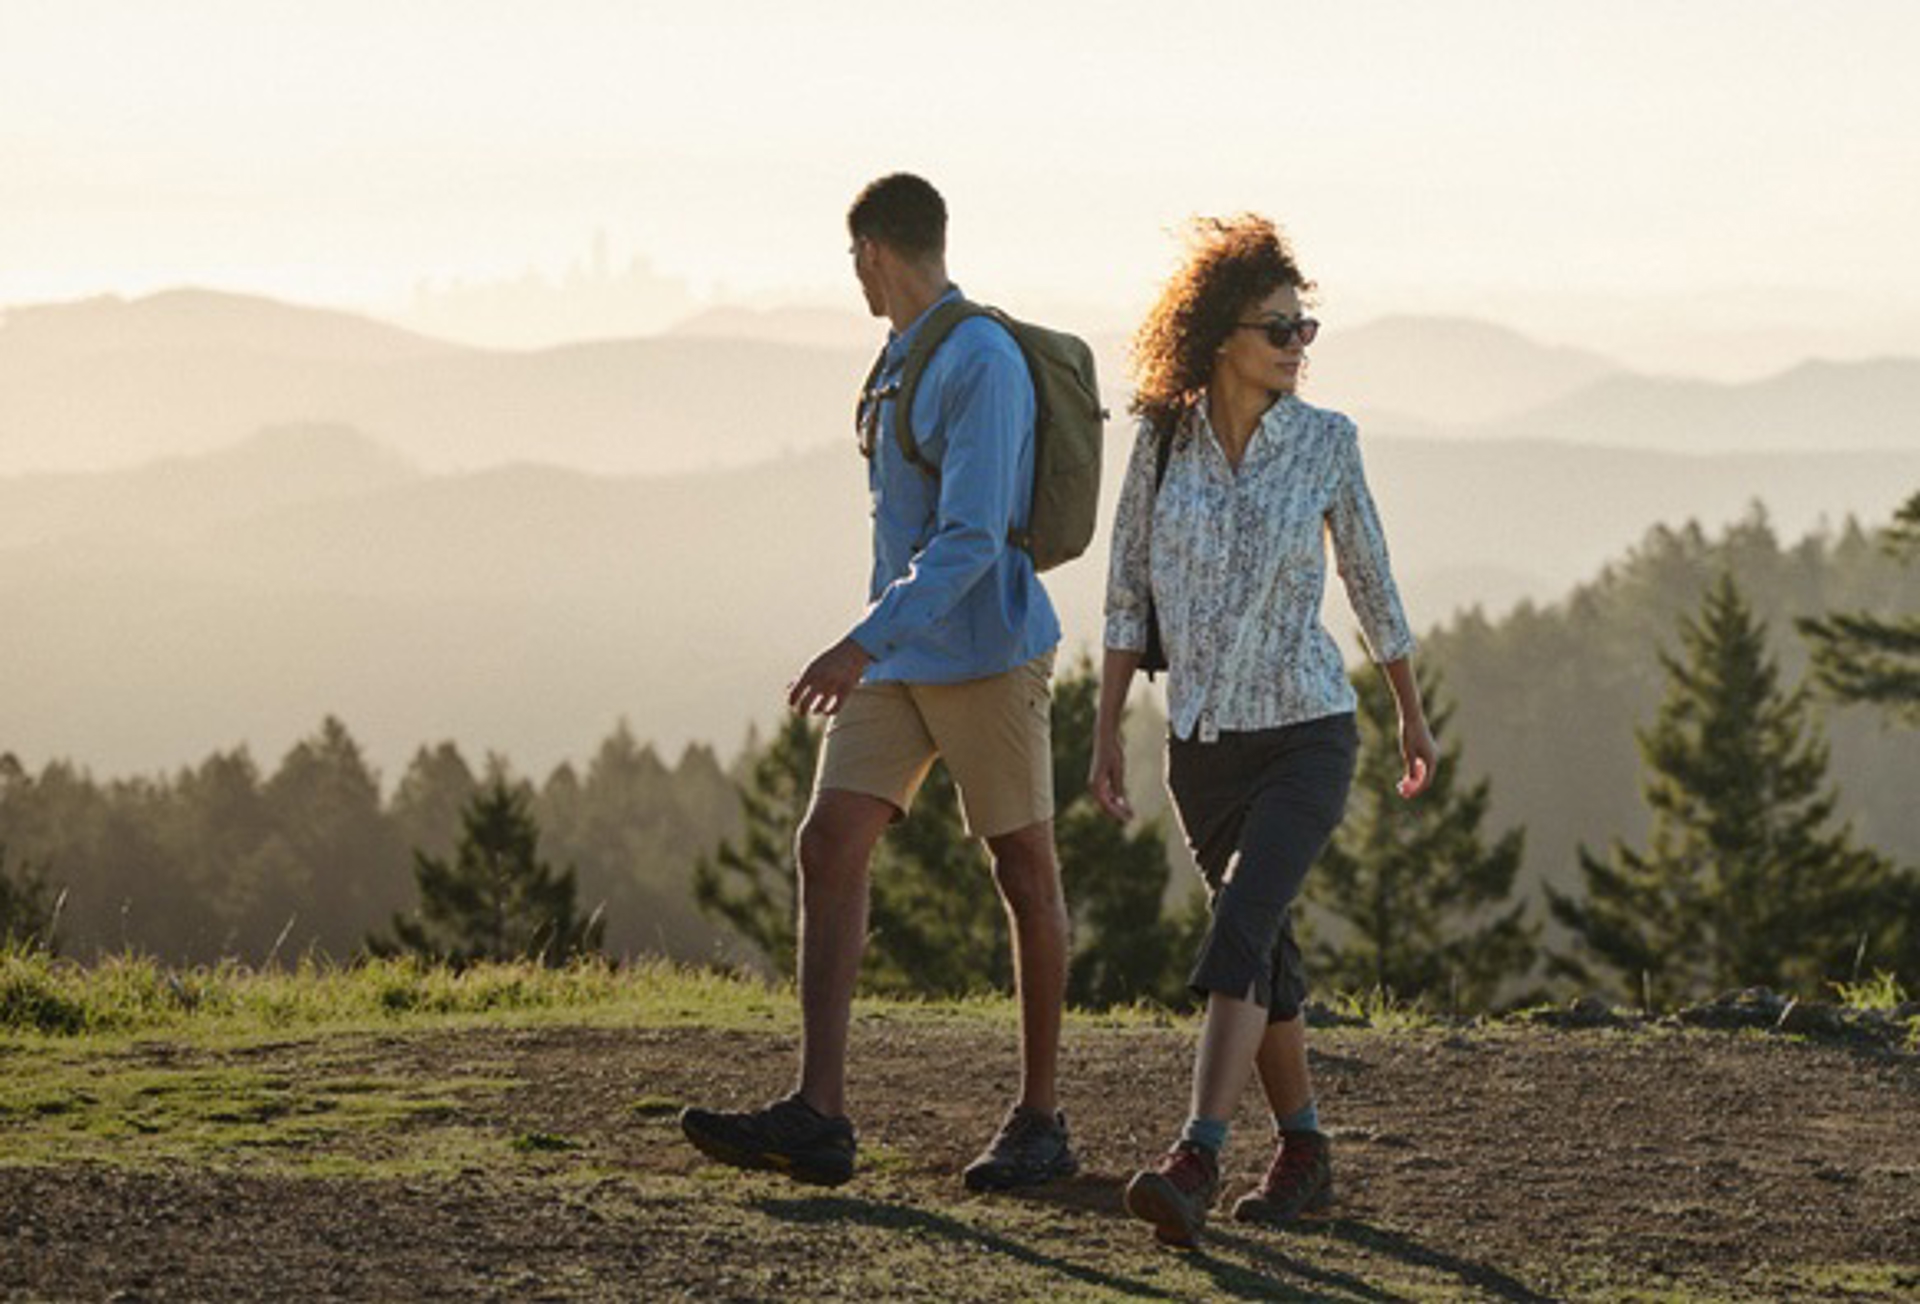 Man and woman on hiking trail overlooking hazy hills and city in background.  